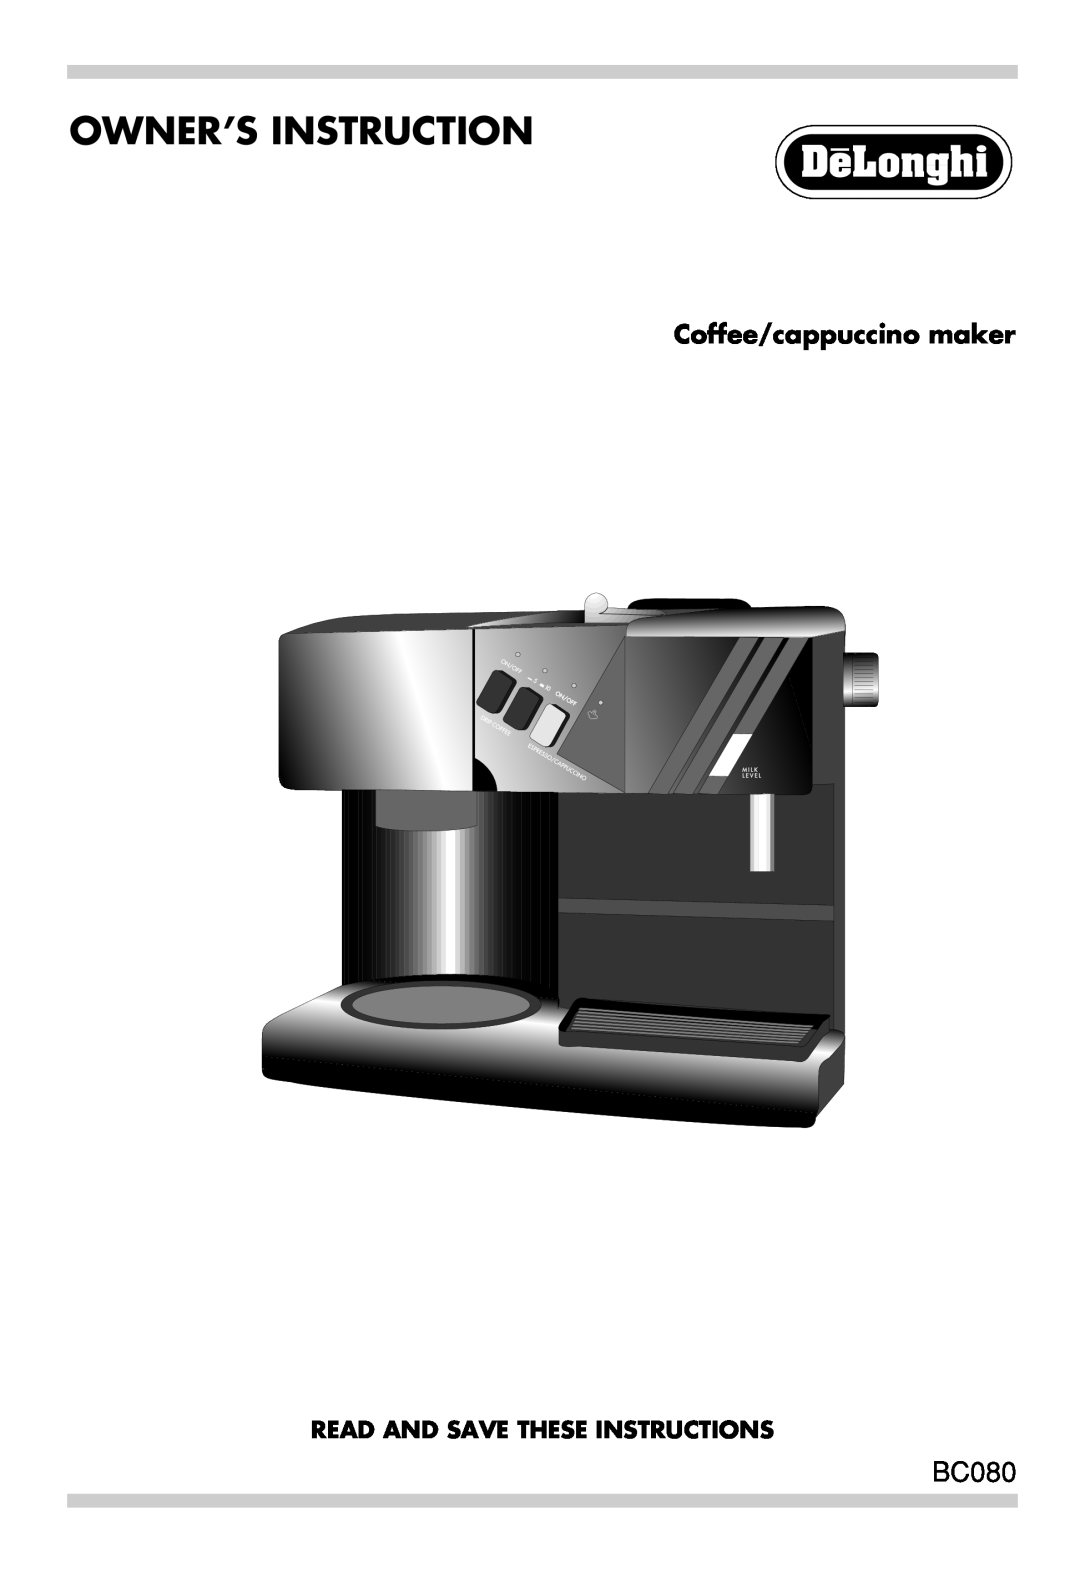 DeLonghi BC080 manual Owner’S Instruction, Coffee/cappuccino maker, Read And Save These Instructions 